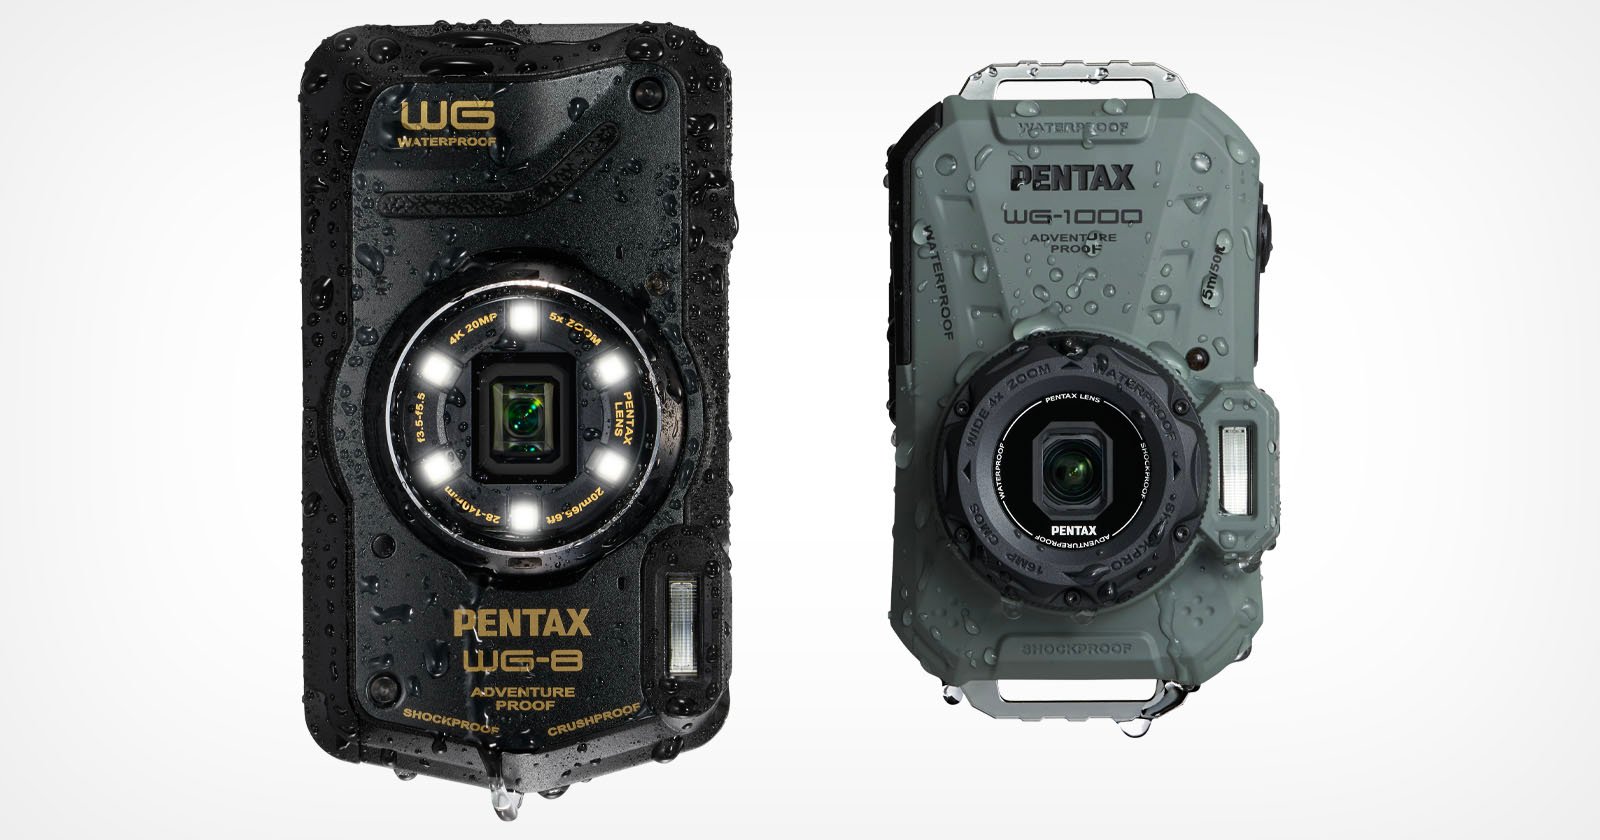 The image displays two rugged, waterproof cameras by Pentax, specifically the WG-8 (left) and WG-1000 (right). Both cameras have water droplets on them, highlighting their durability and outdoor-proof design. The WG-8 is black while the WG-1000 is gray.